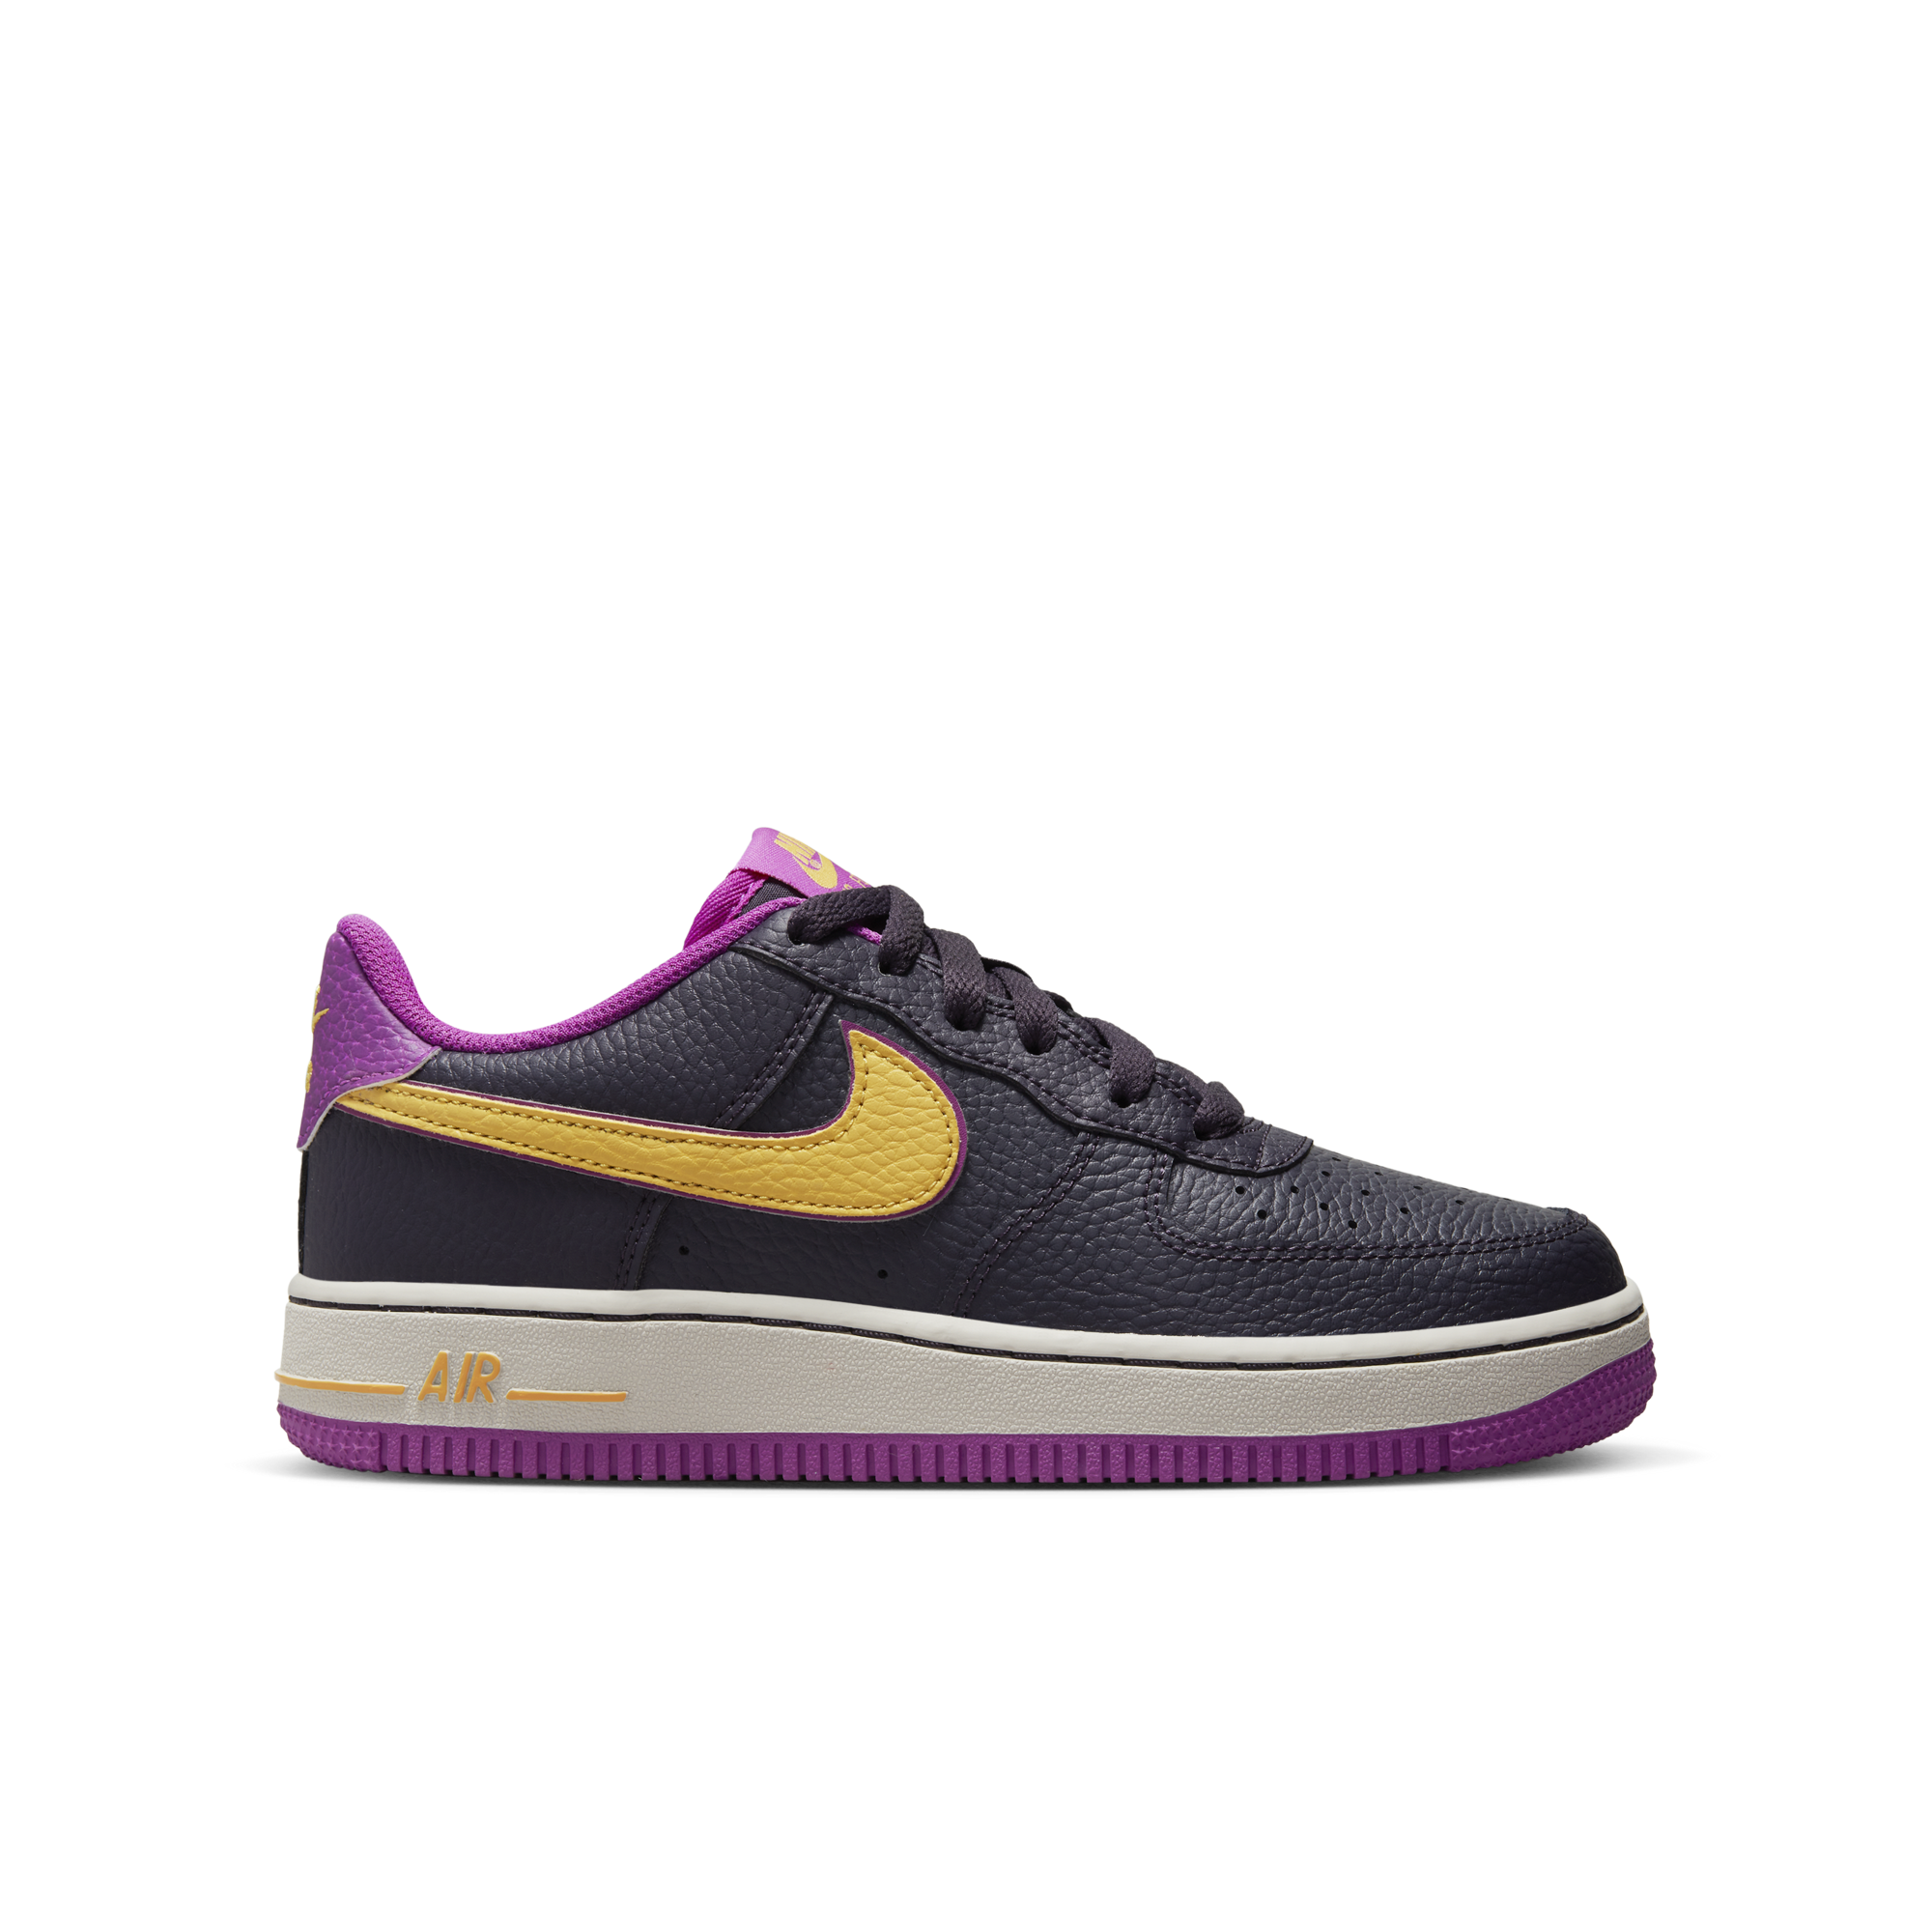 Nike Air Force 1 Low World Champ Lakers Black Purple Shoes 